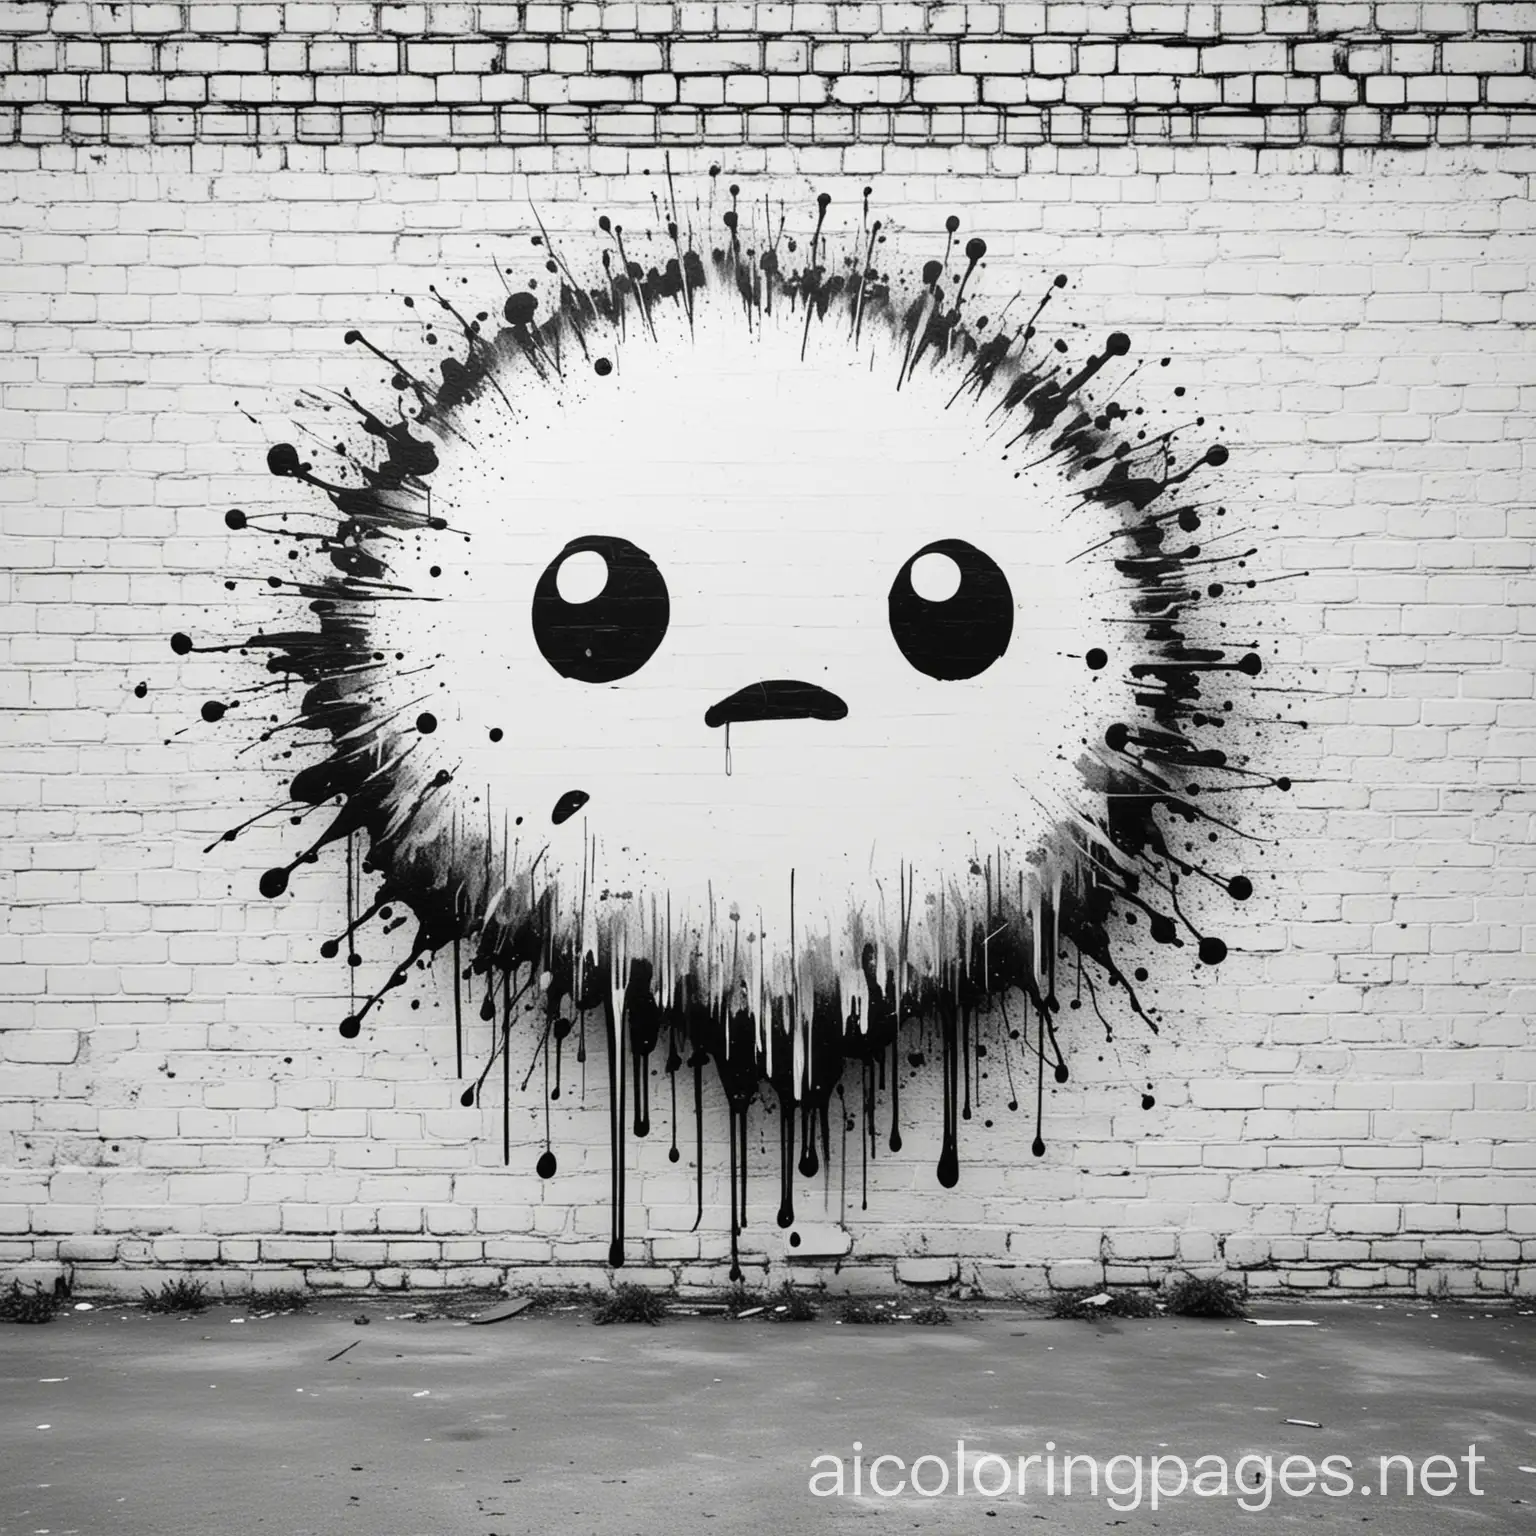 splatter blob graffiti on a brick wall, Coloring Page, black and white, line art, white background, Simplicity, Ample White Space. The background of the coloring page is plain white to make it easy for young children to color within the lines. The outlines of all the subjects are easy to distinguish, making it simple for kids to color without too much difficulty